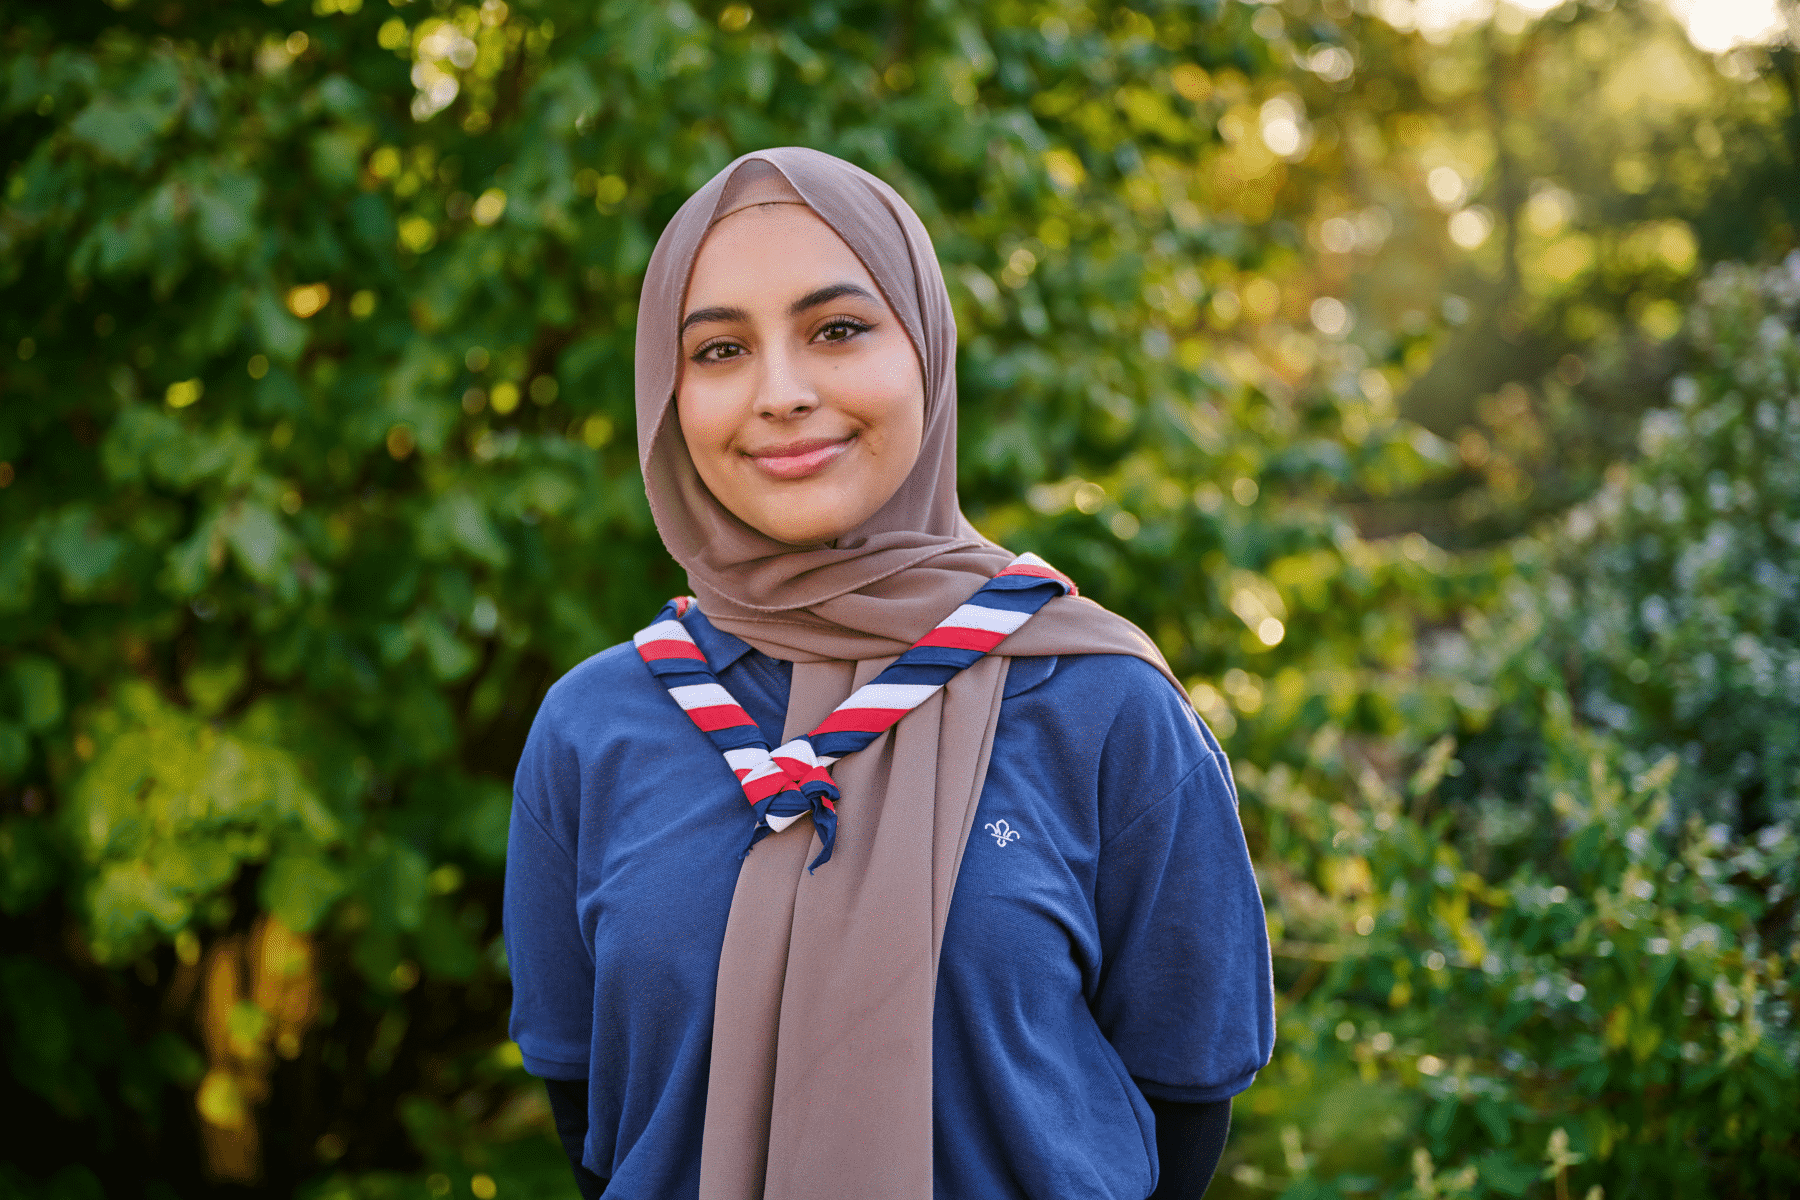 Ayesha is stood in front of trees. She is smiling and is wearing her hijab and Scouts necker. She looks relaxed and is wearing a blue Scouts top, with her hands behind her back.